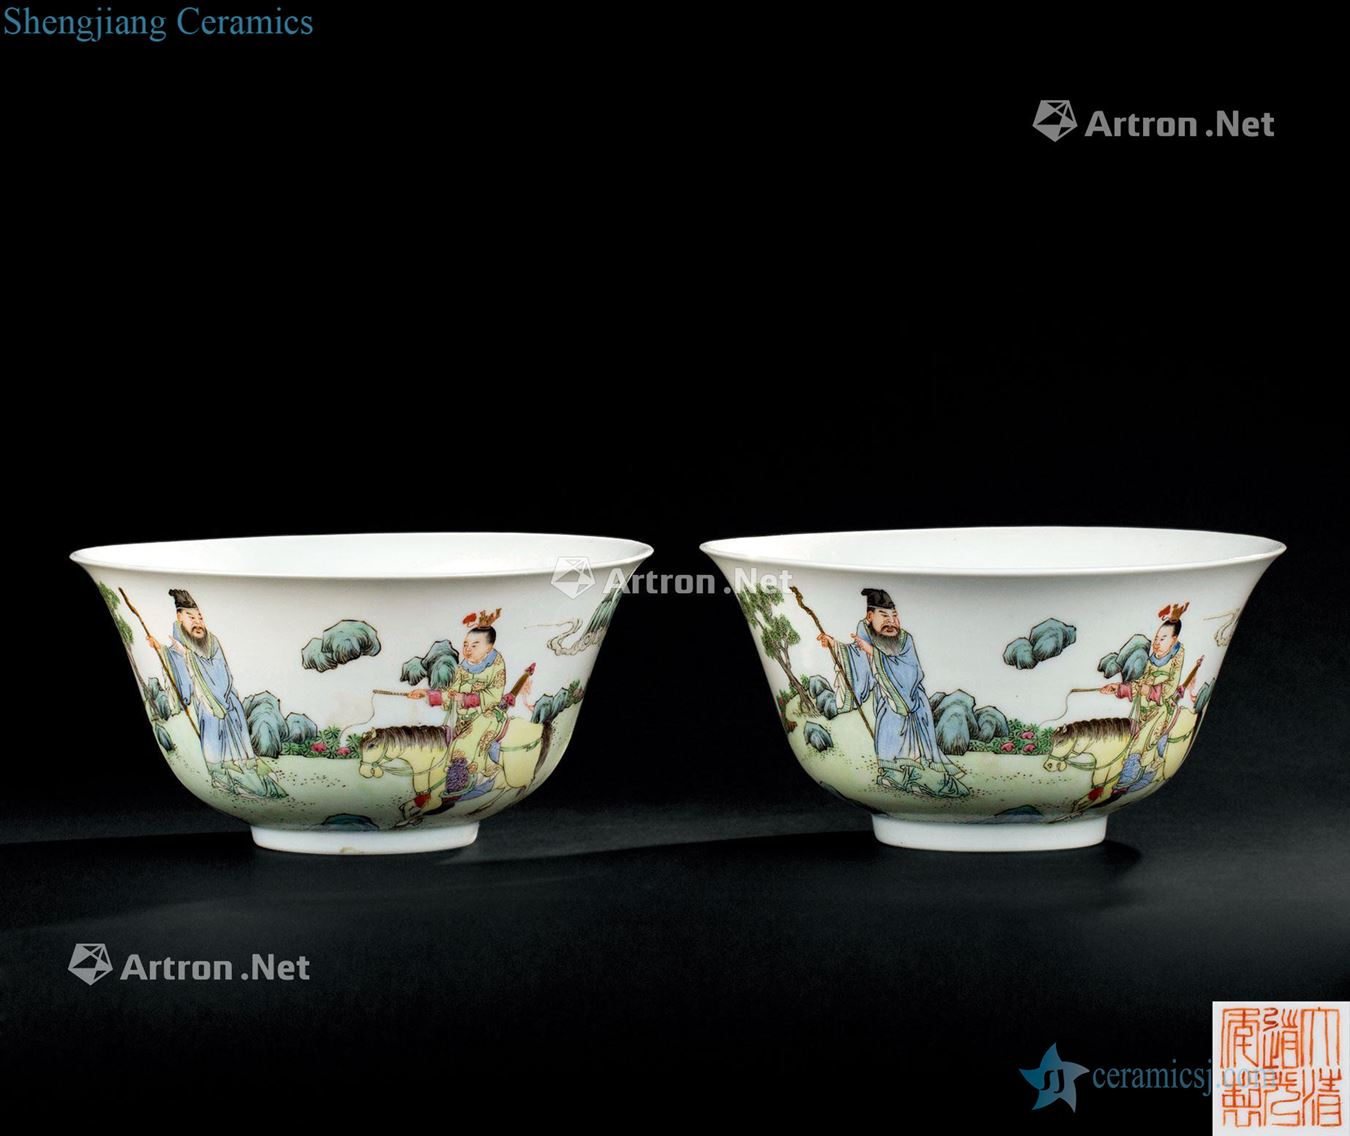 In the qing dynasty (1644-1911), stories of pastel green-splashed bowls (a)